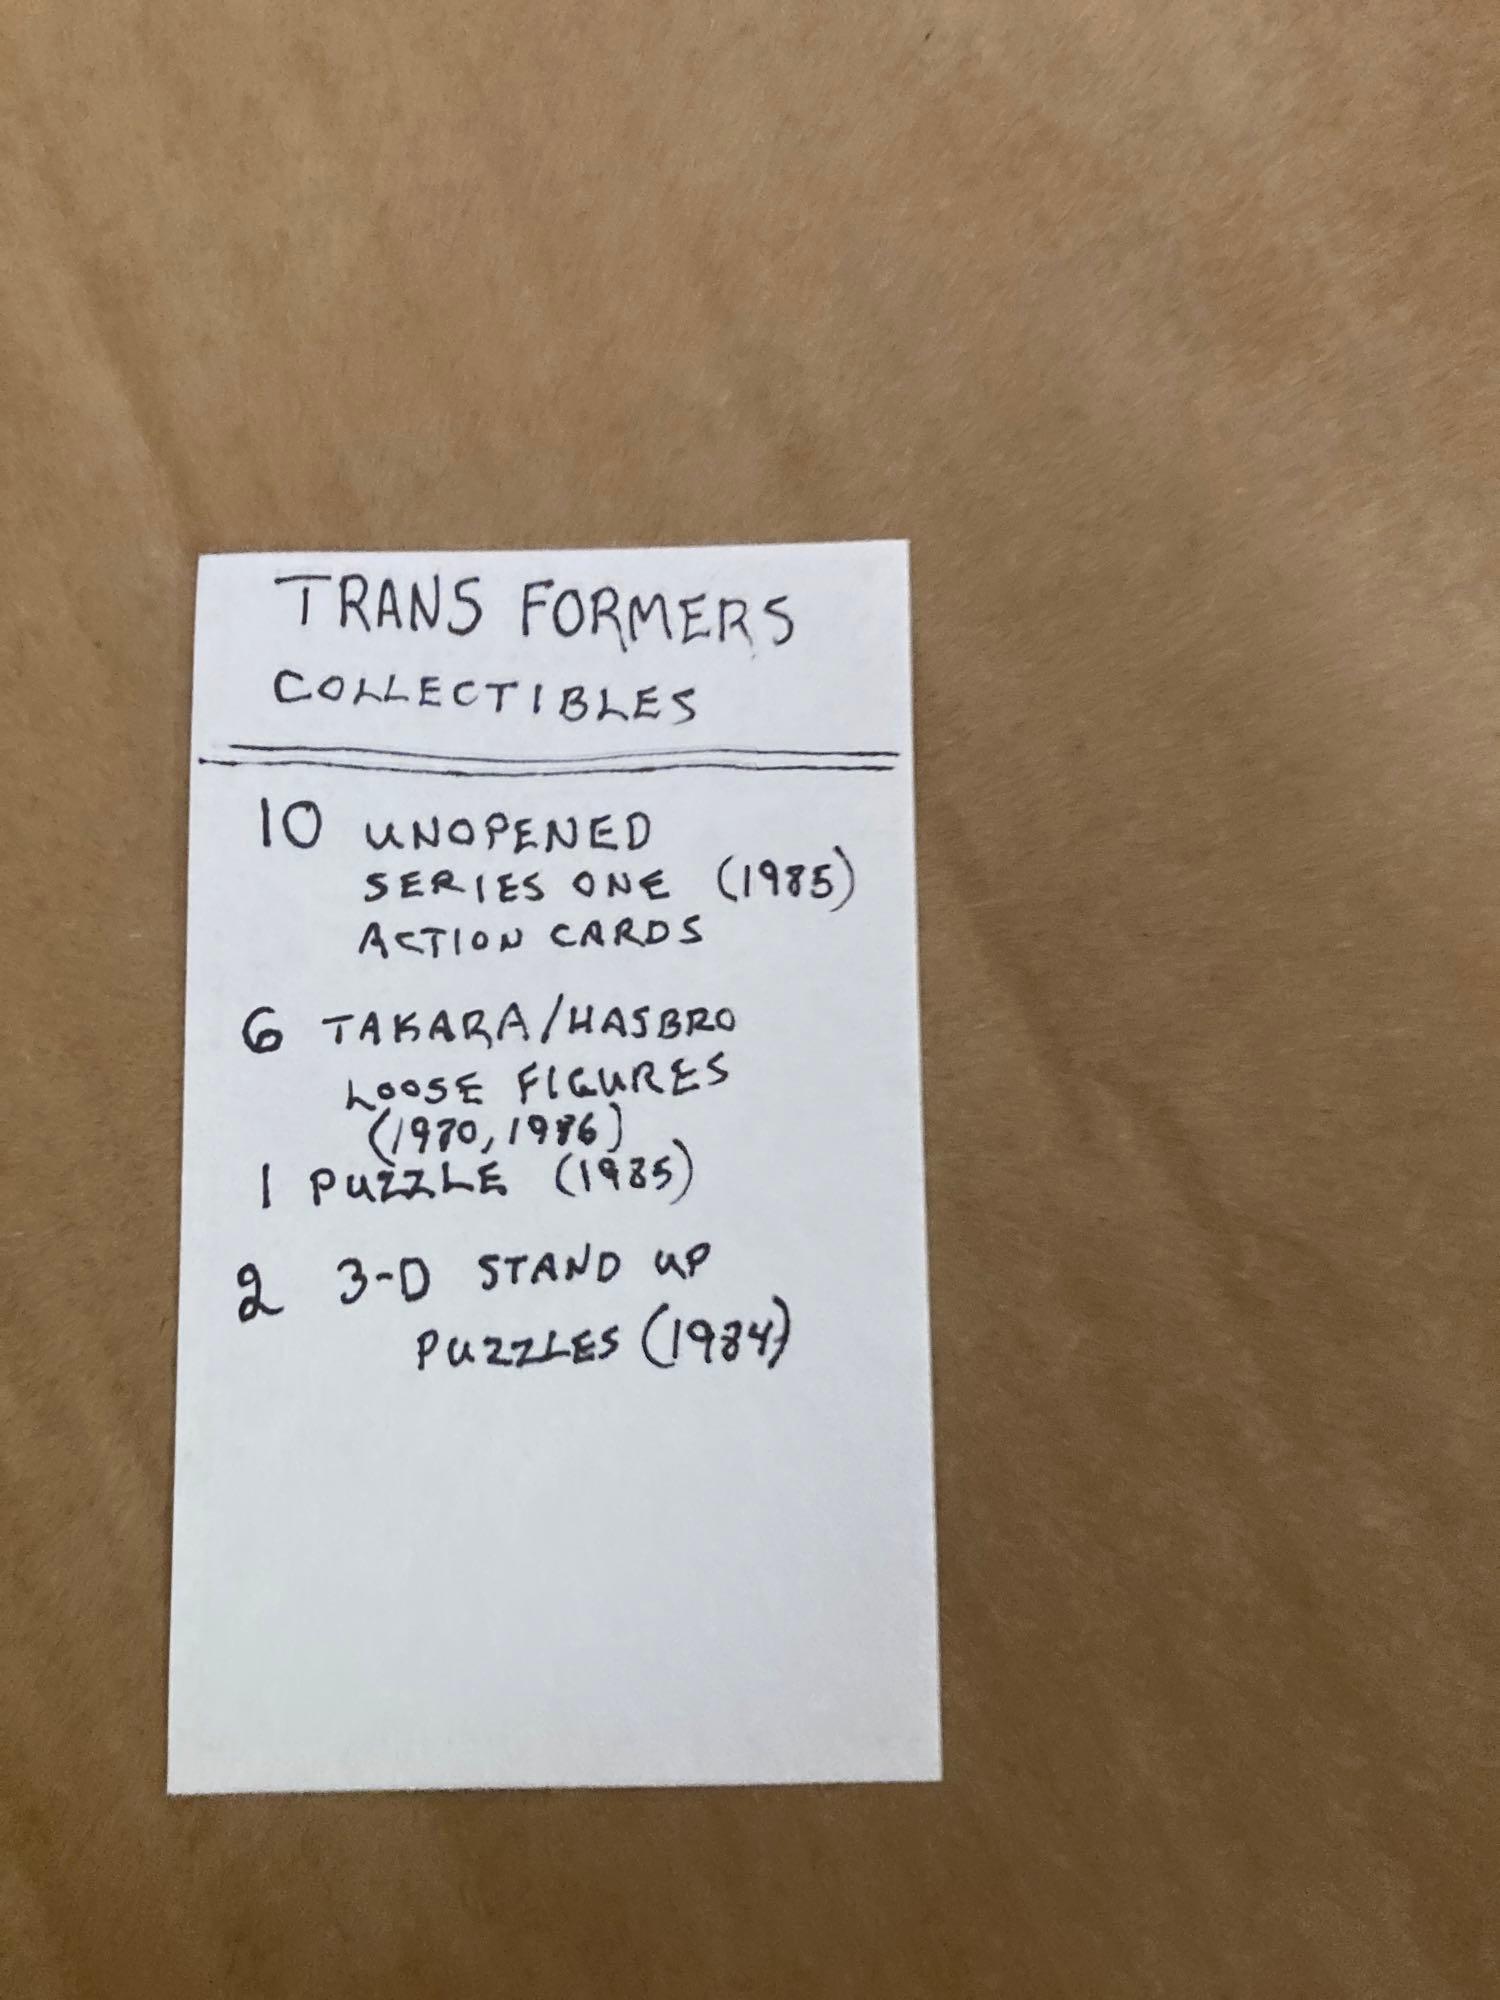 Transformers collectibles see list